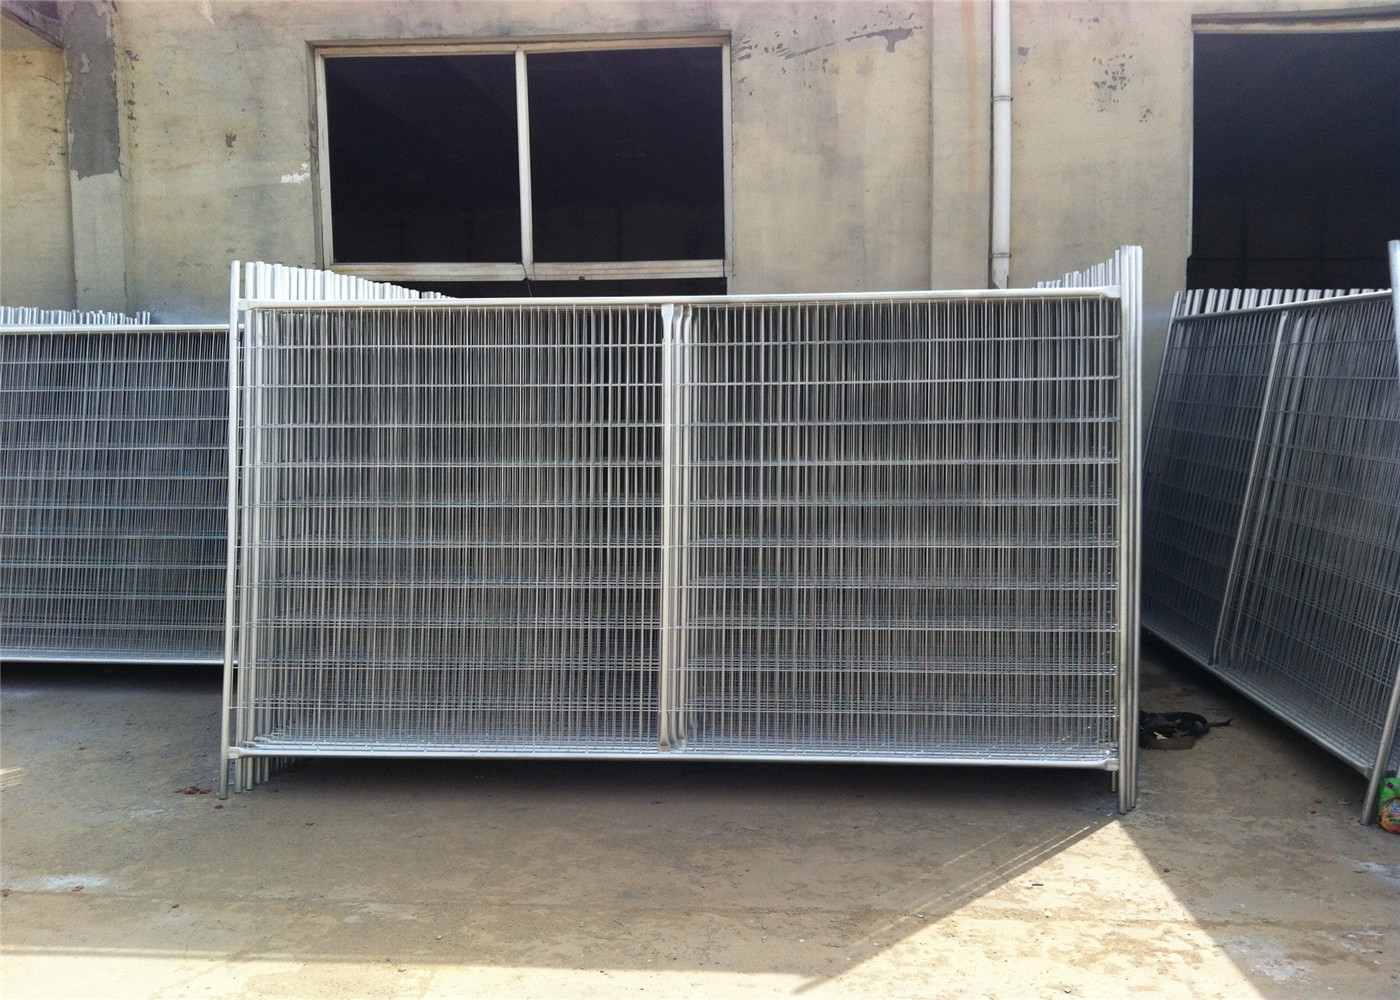  2.1m x 3.3m 3.5m widht Auckland temp construction site secuirty fence Manufactures